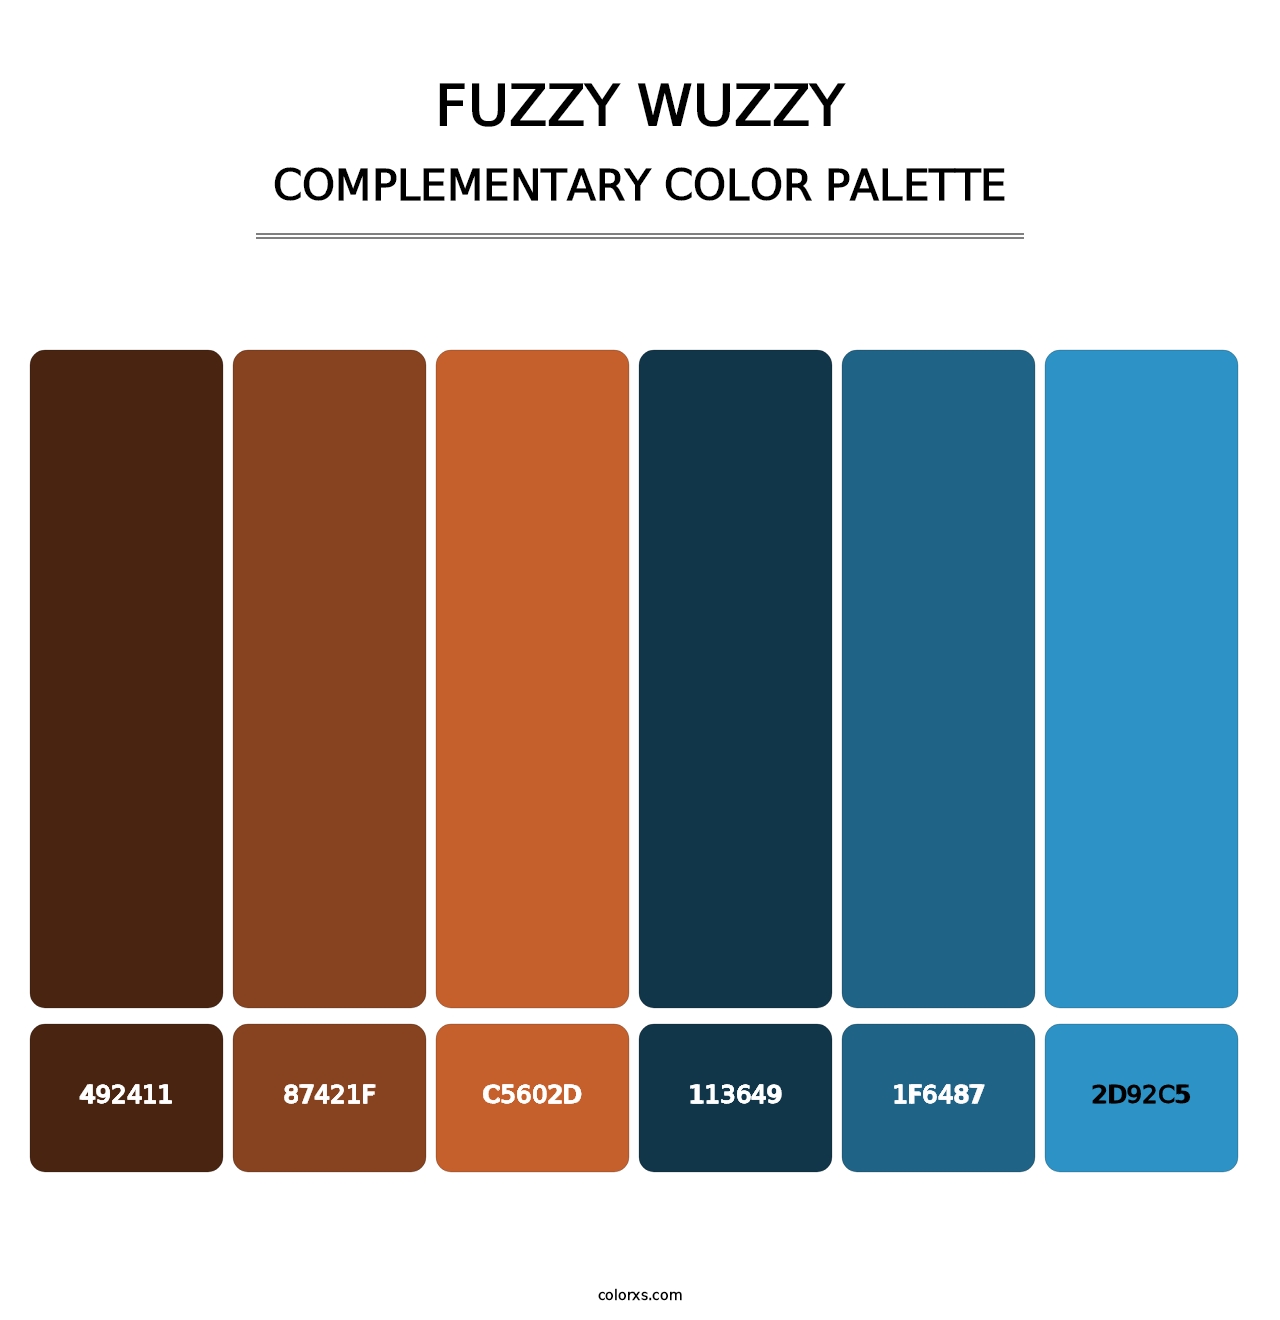 Fuzzy Wuzzy - Complementary Color Palette